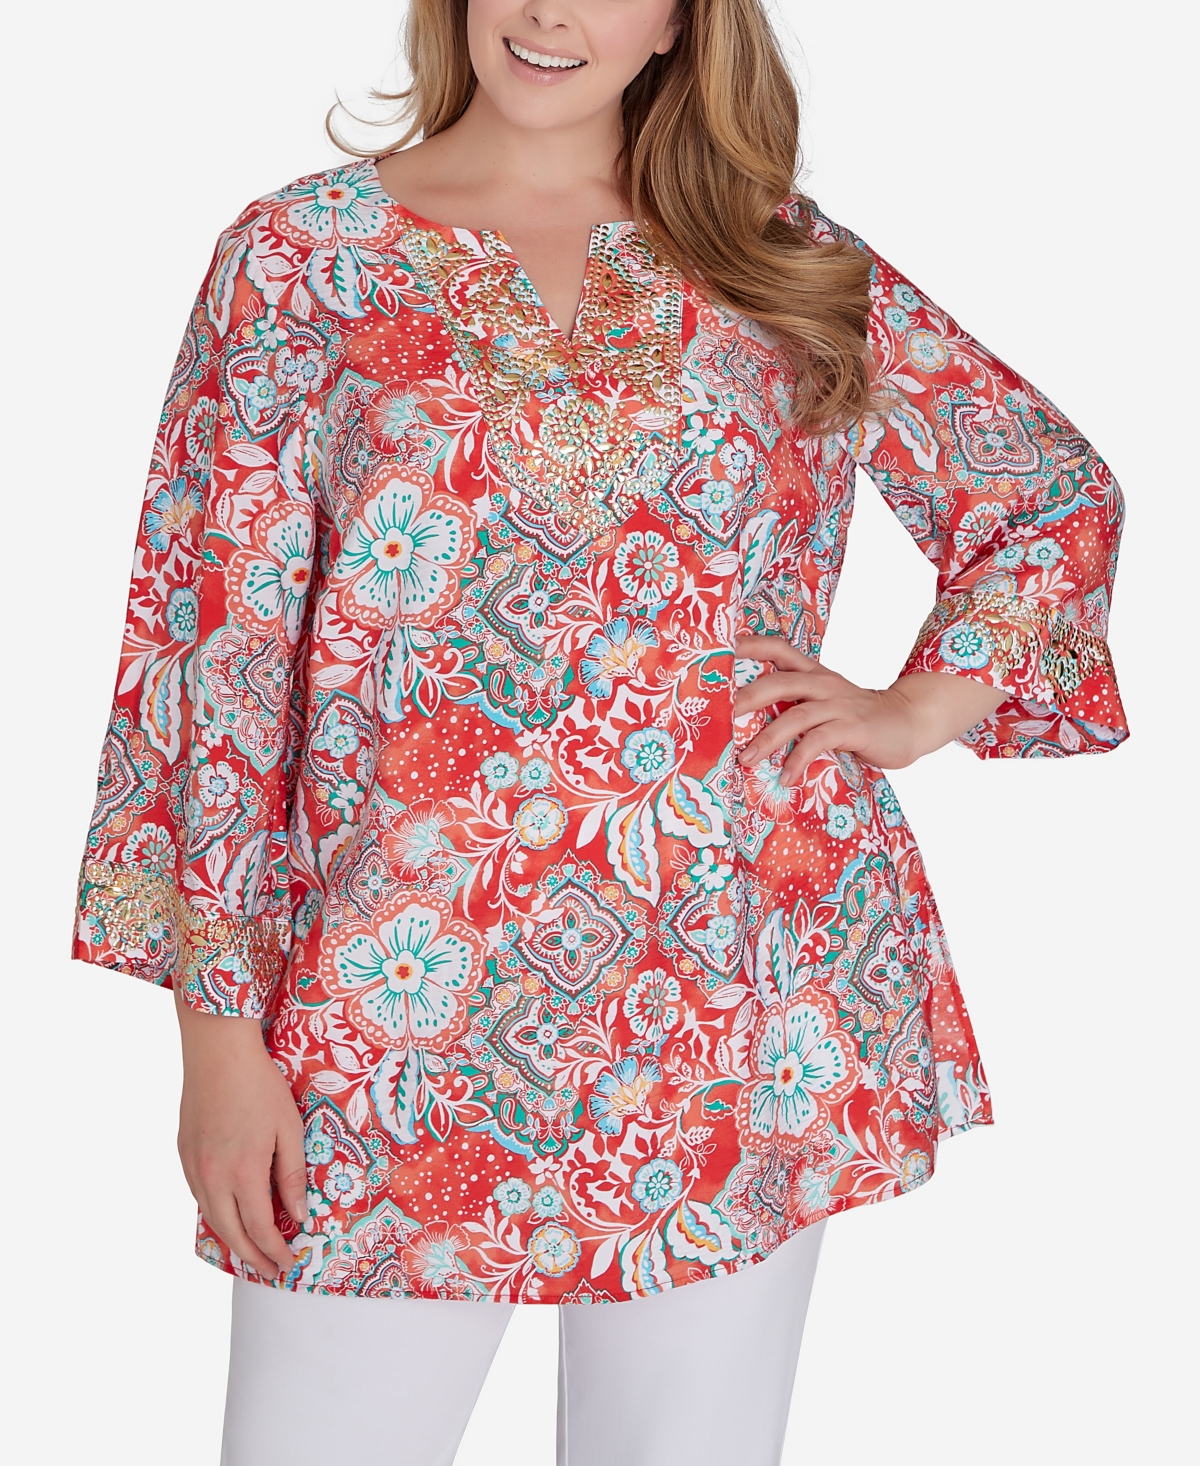 Ruby Rd. Plus Size Silky Floral Voile Top In Red